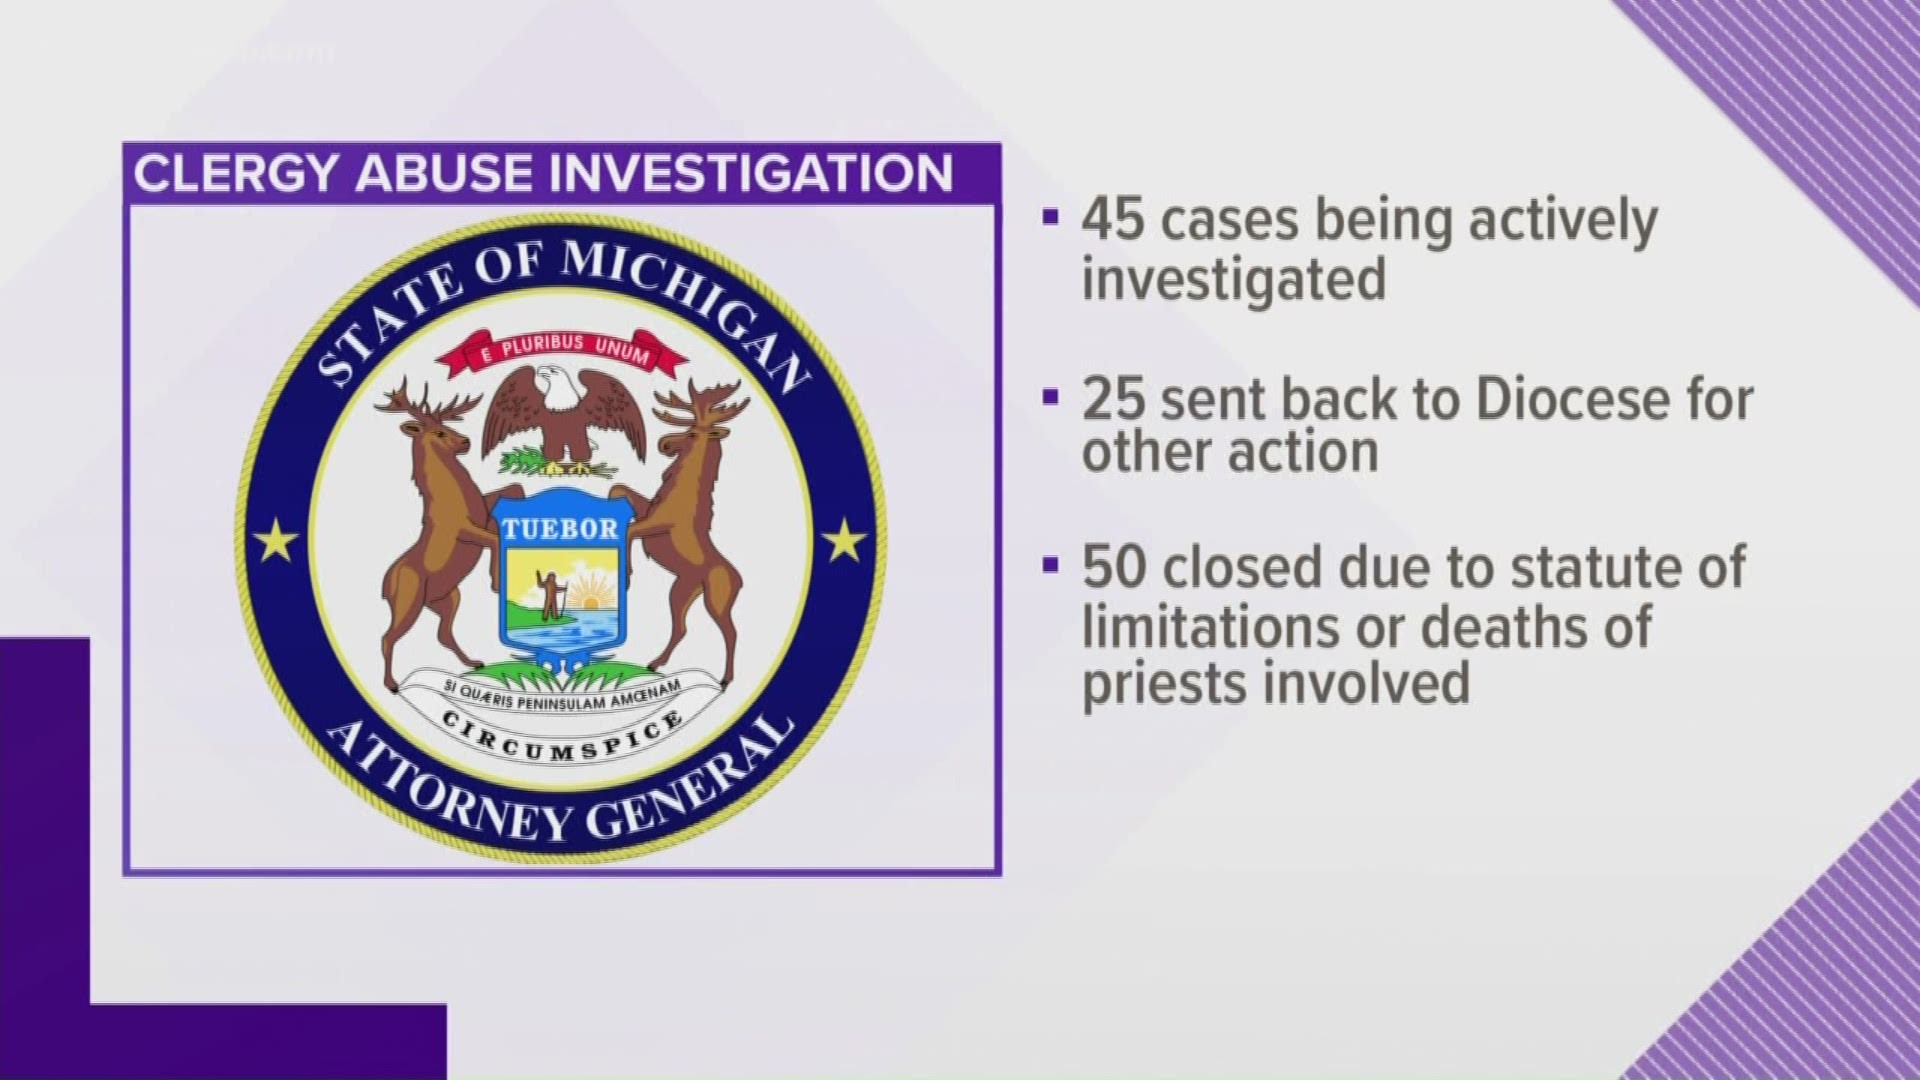 Attorney General Dana Nessel shares an update on the clergy abuse investigation that she took over from former AG Bill Schuette.